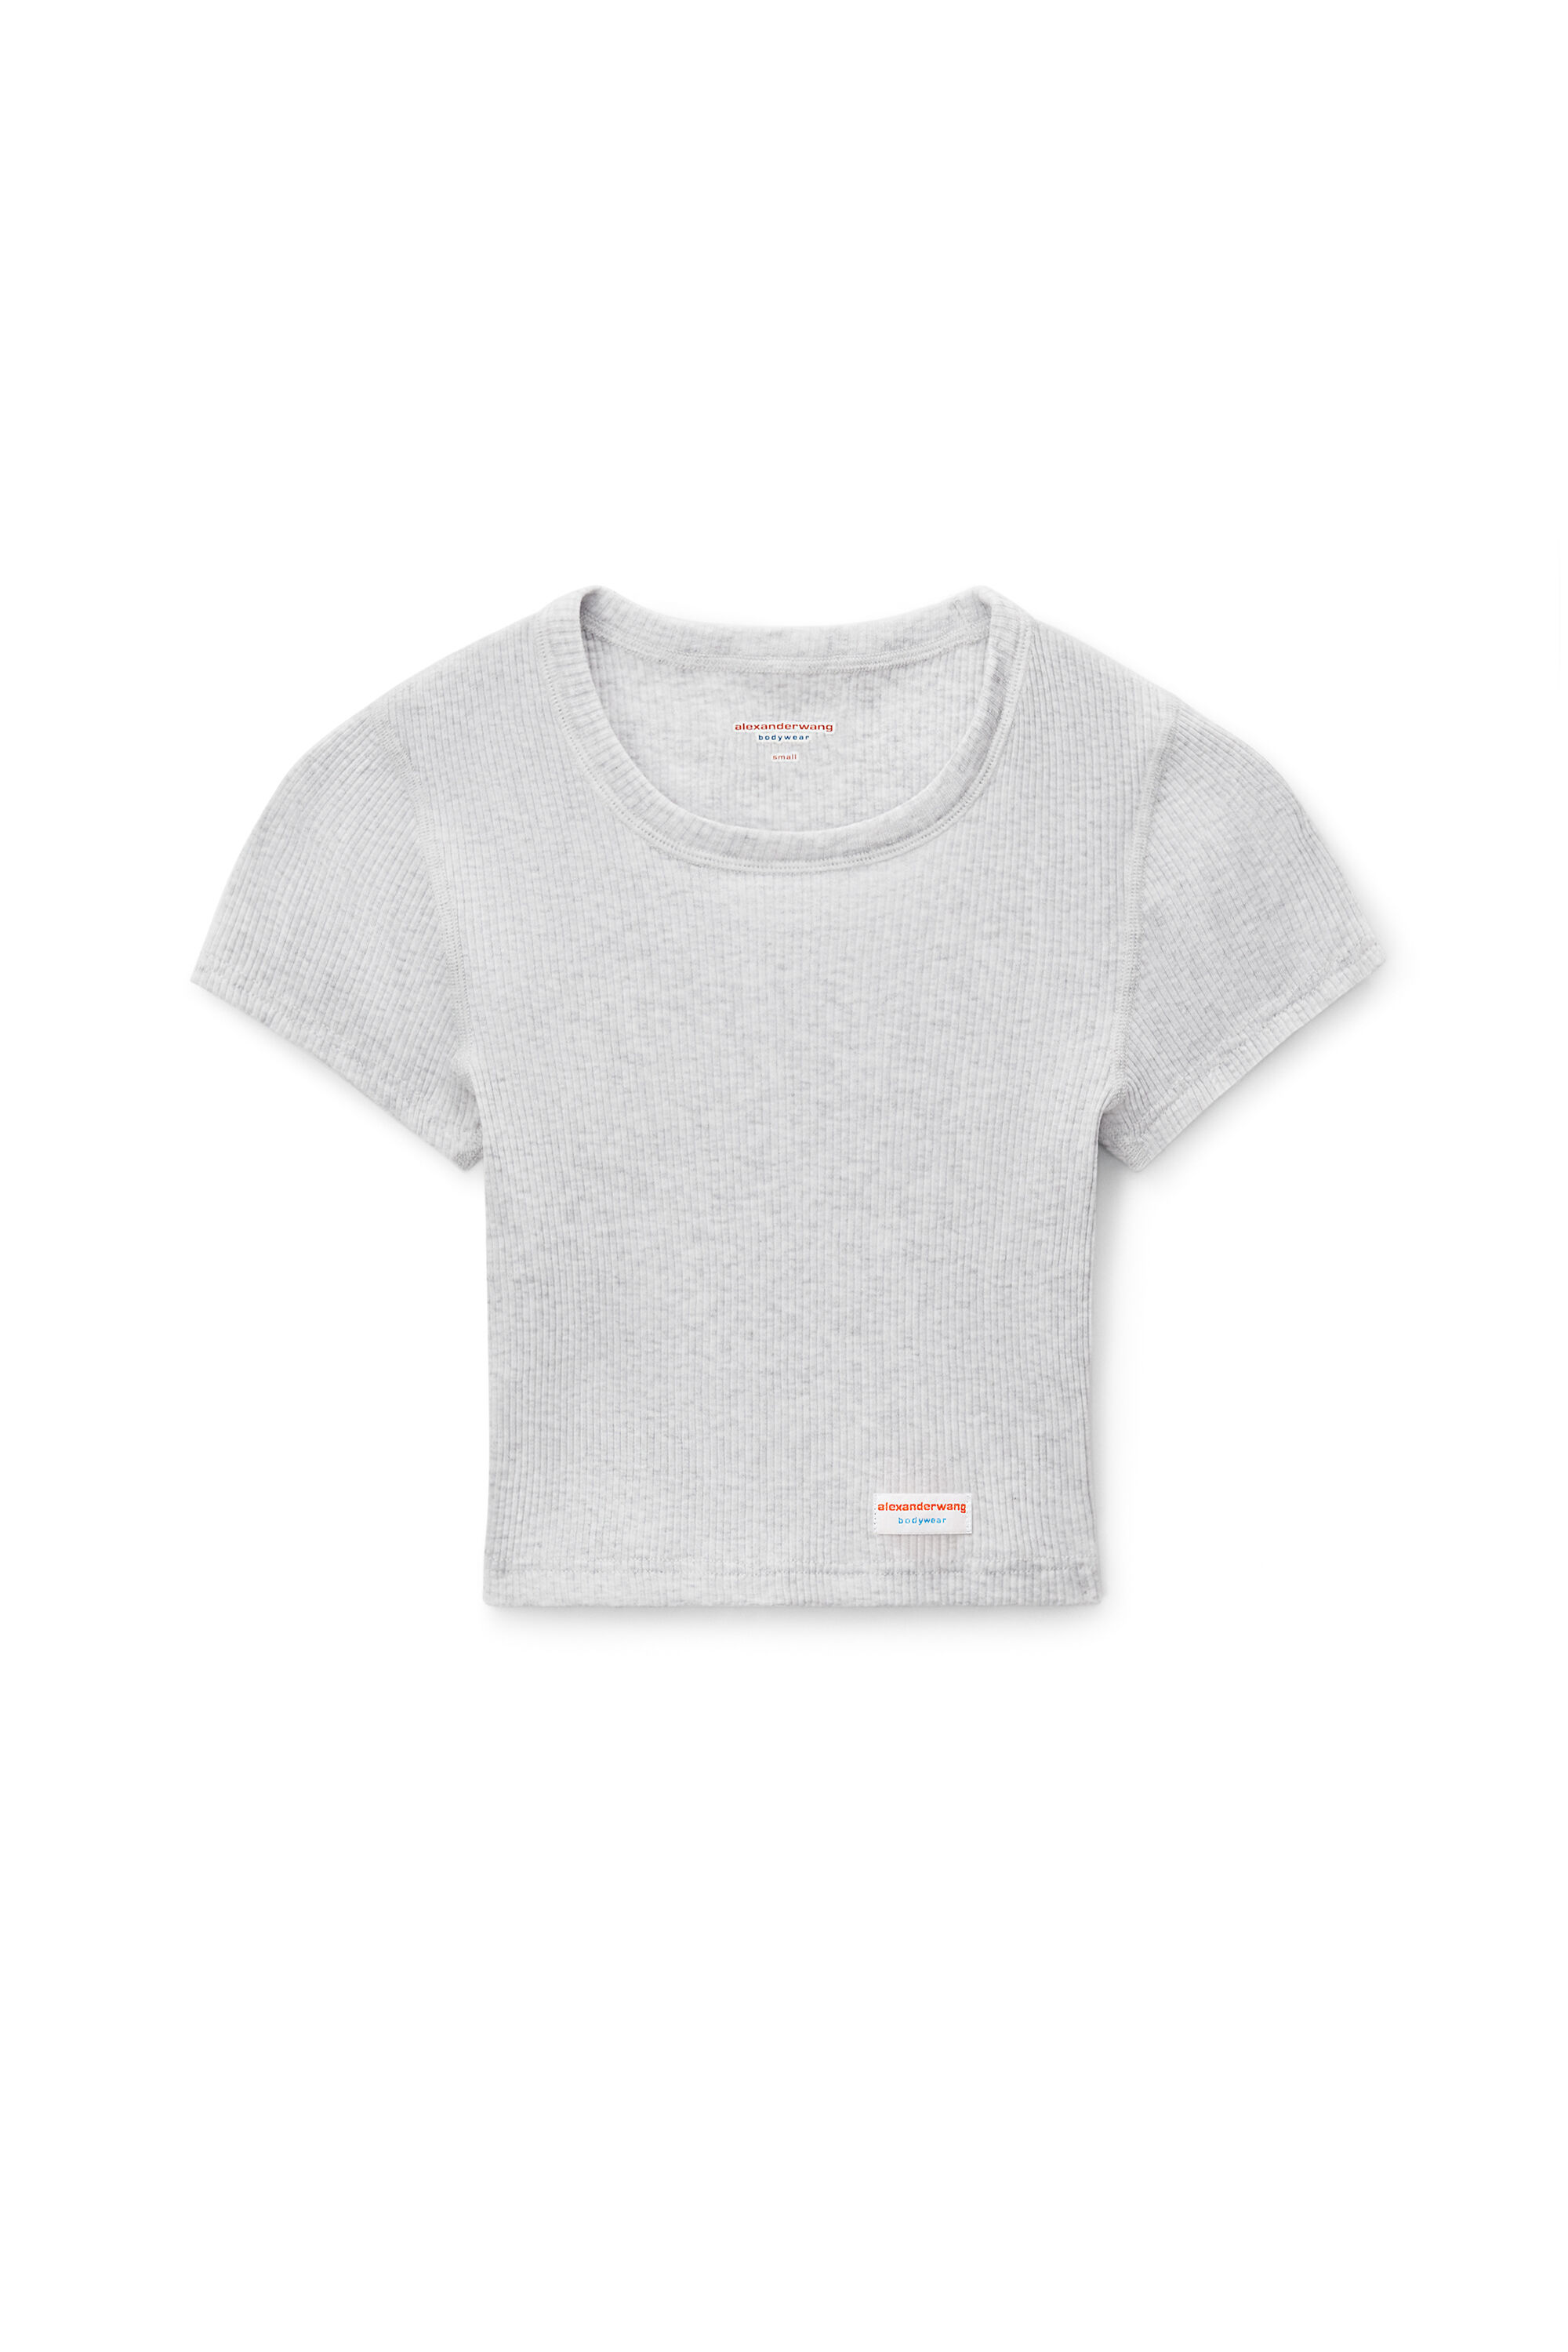 alexanderwang Cropped Short-Sleeve Tee in Ribbed Cotton Jersey 